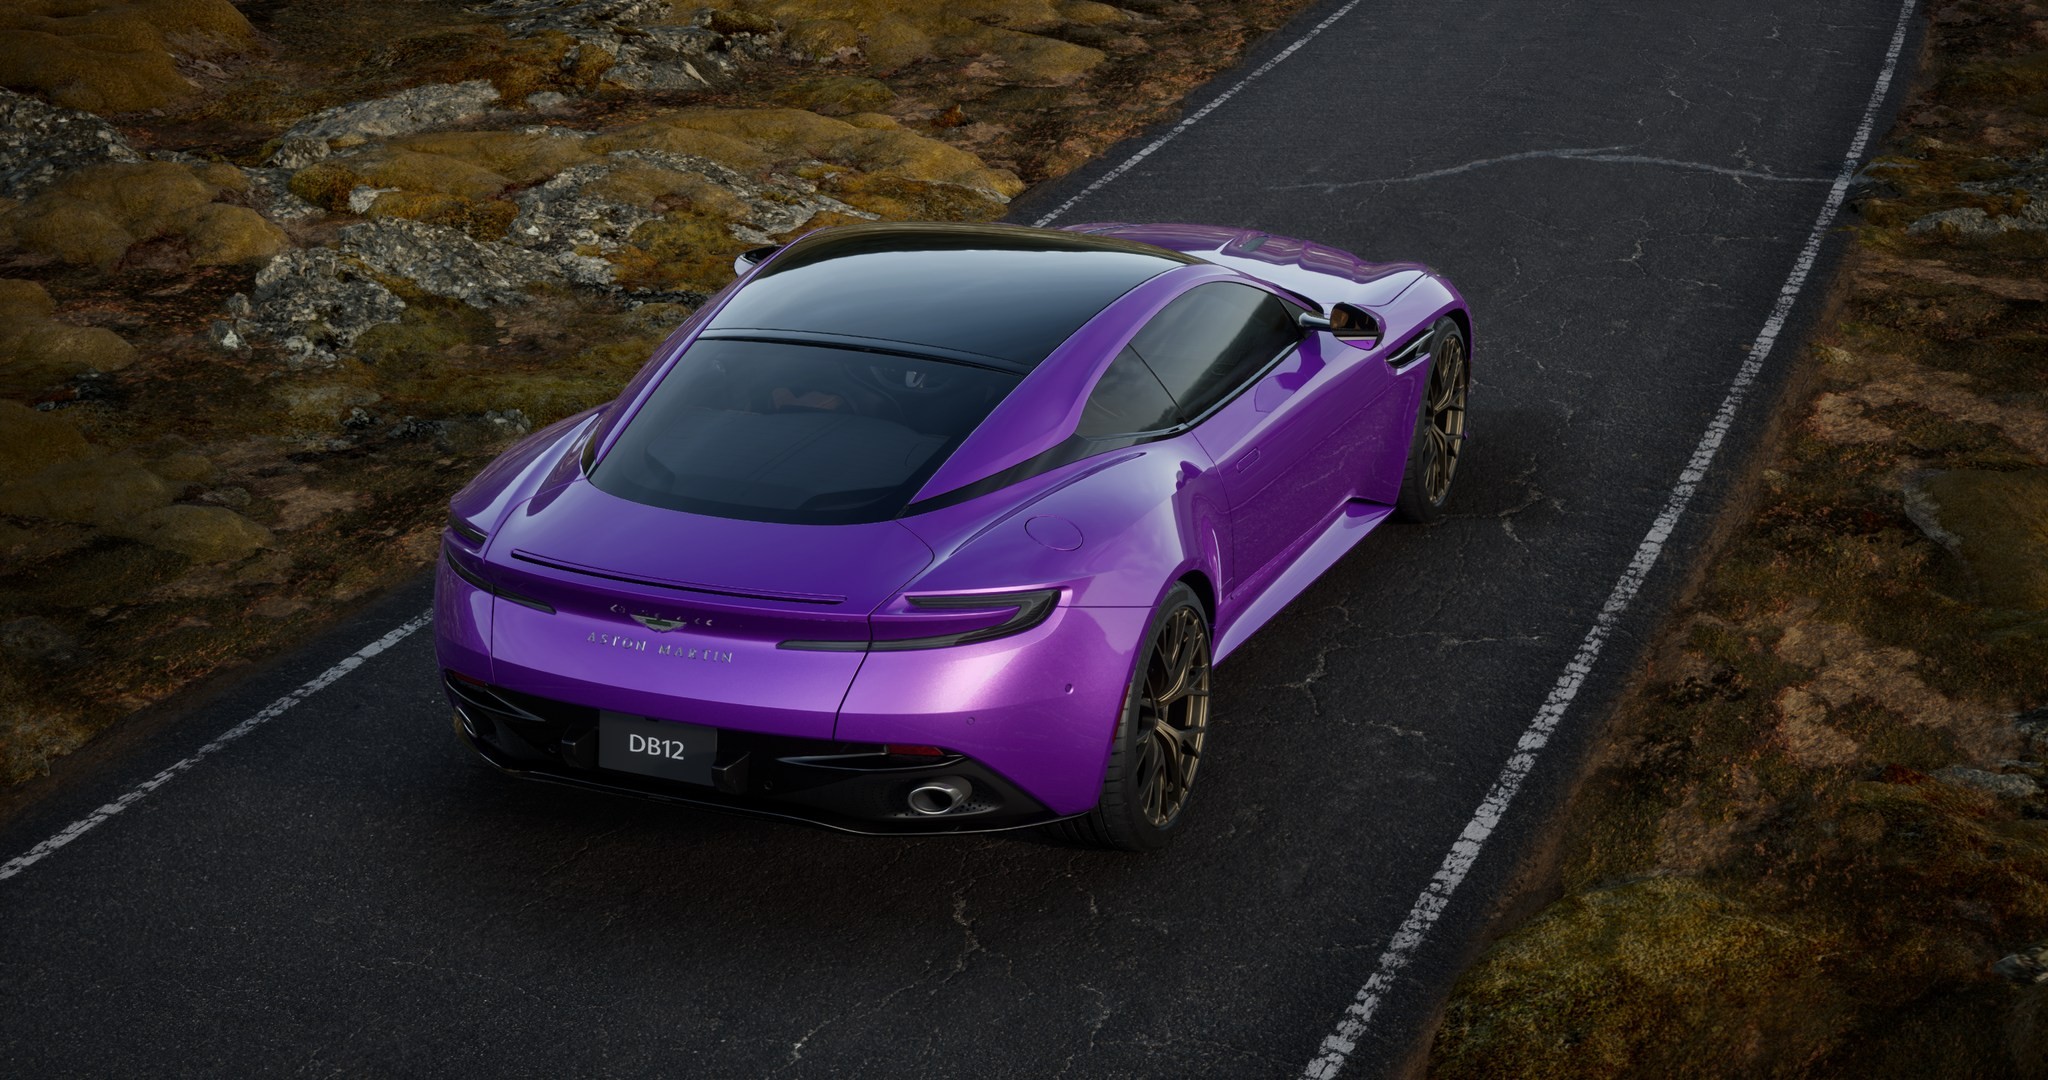 The Swanky 2024 Aston Martin Db12 Configurator Goes Live Cue Some Ominous Music 2 